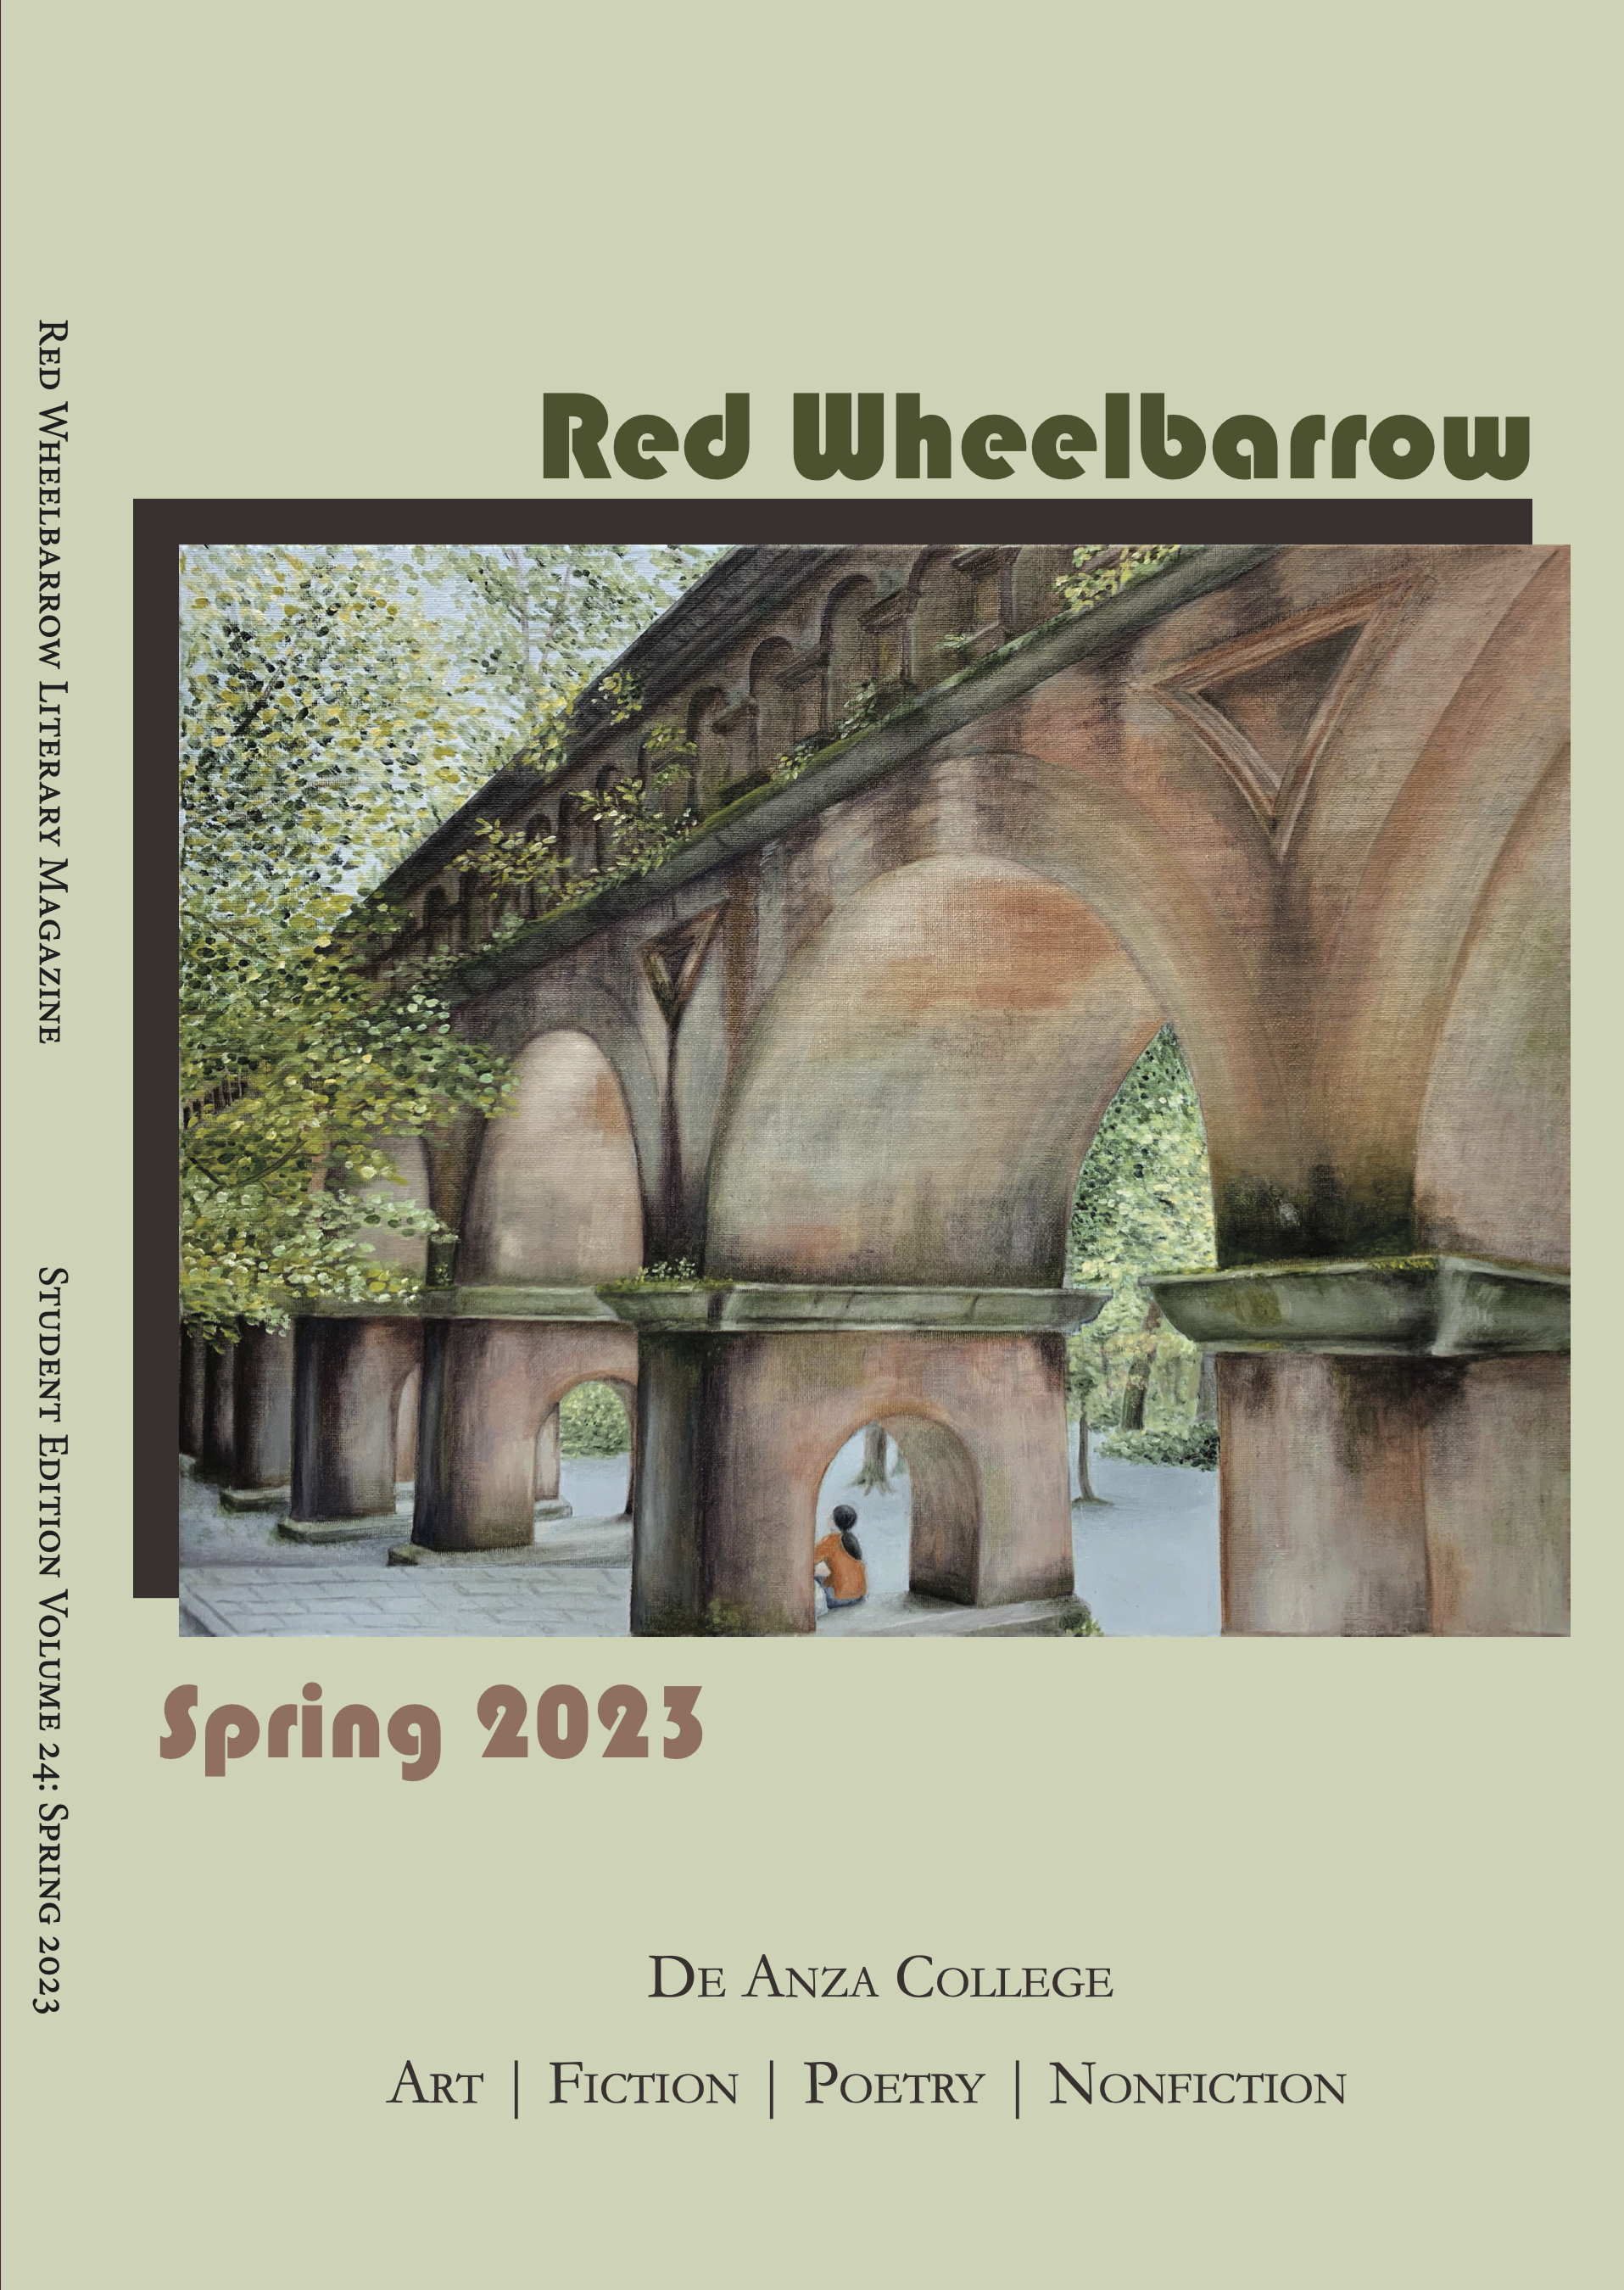 Cover & spine of 2023 Red Wheelbarrrow Student Edition